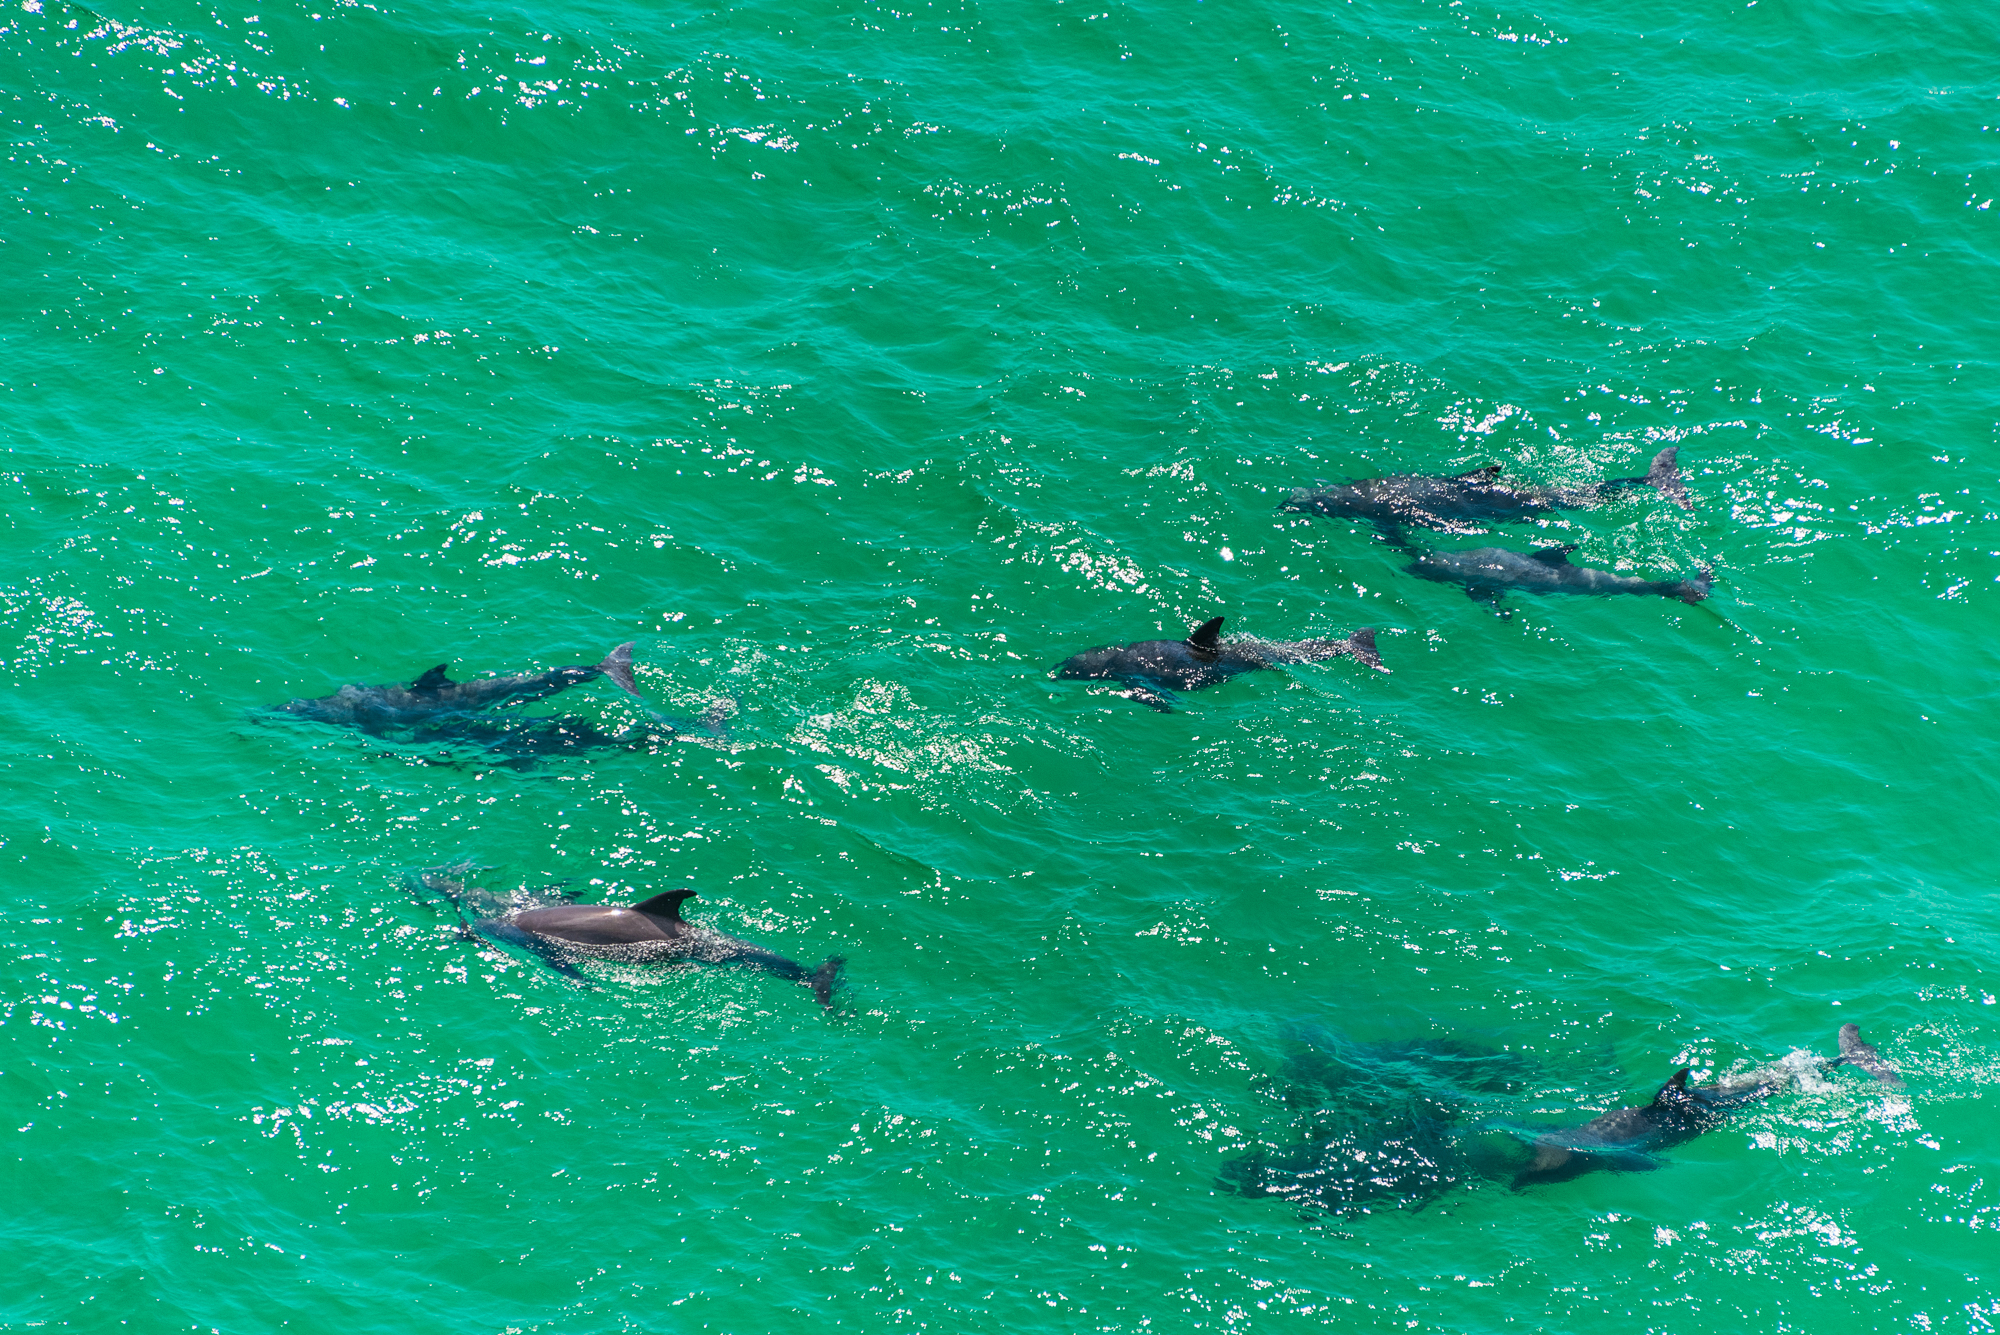 Dolphins at Play in the Gulf